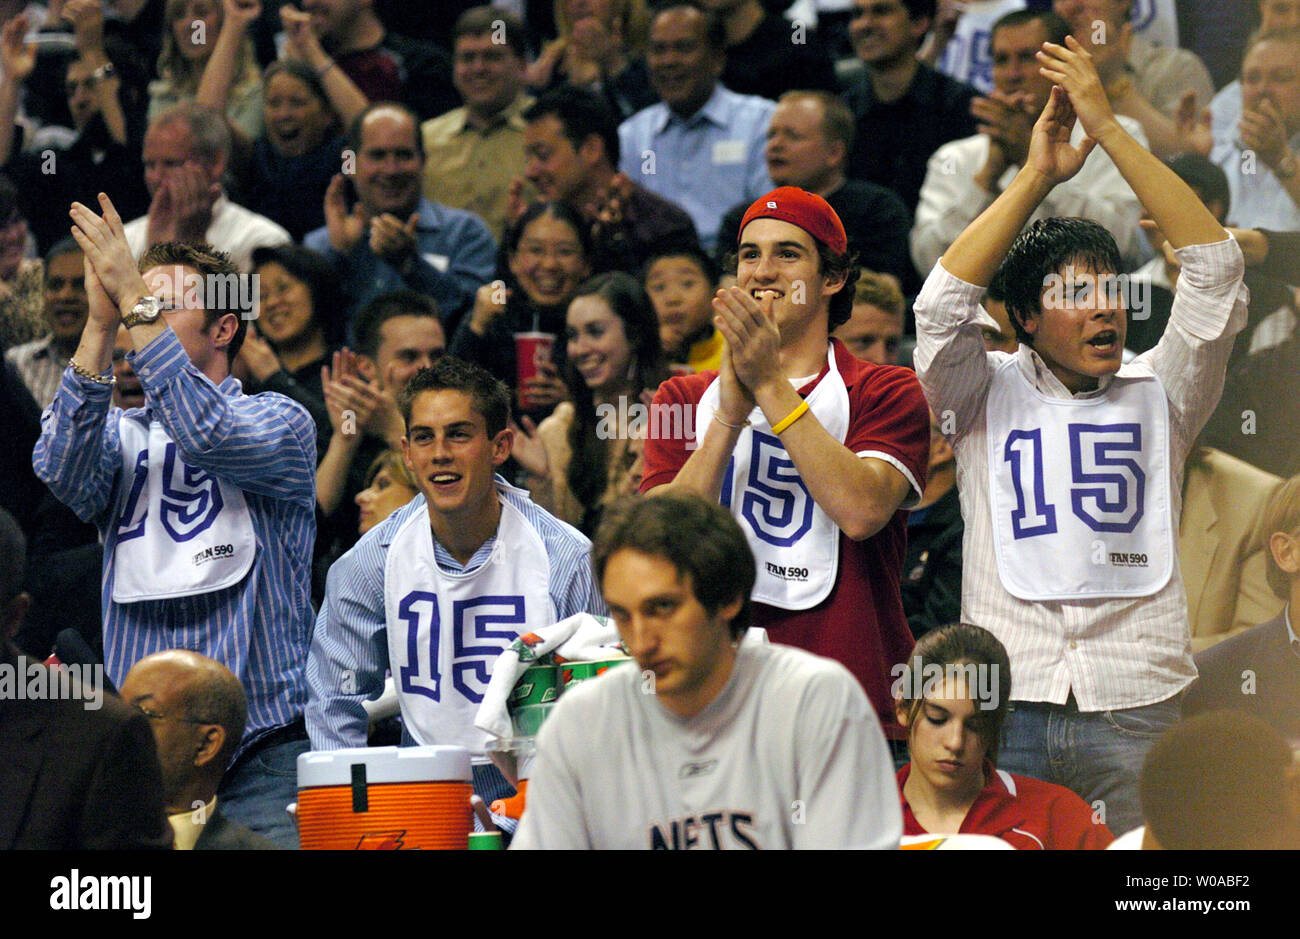 Fans wearing babies' bibs with New Jersey Nets' Vince Carter's number heckled their former hero throughout the game as the Toronto Raptors hosted the Nets at the Air Canada Center April 15, 2005 in Toronto, Canada. Carter who had a reputation as a mama's boy  and crybaby among fans here scored 39 points as he led the Nets to a 101-90 win over his former team in his first appearance back in Toronto after being traded. (UPI Photo/Christine Chew) Stock Photo